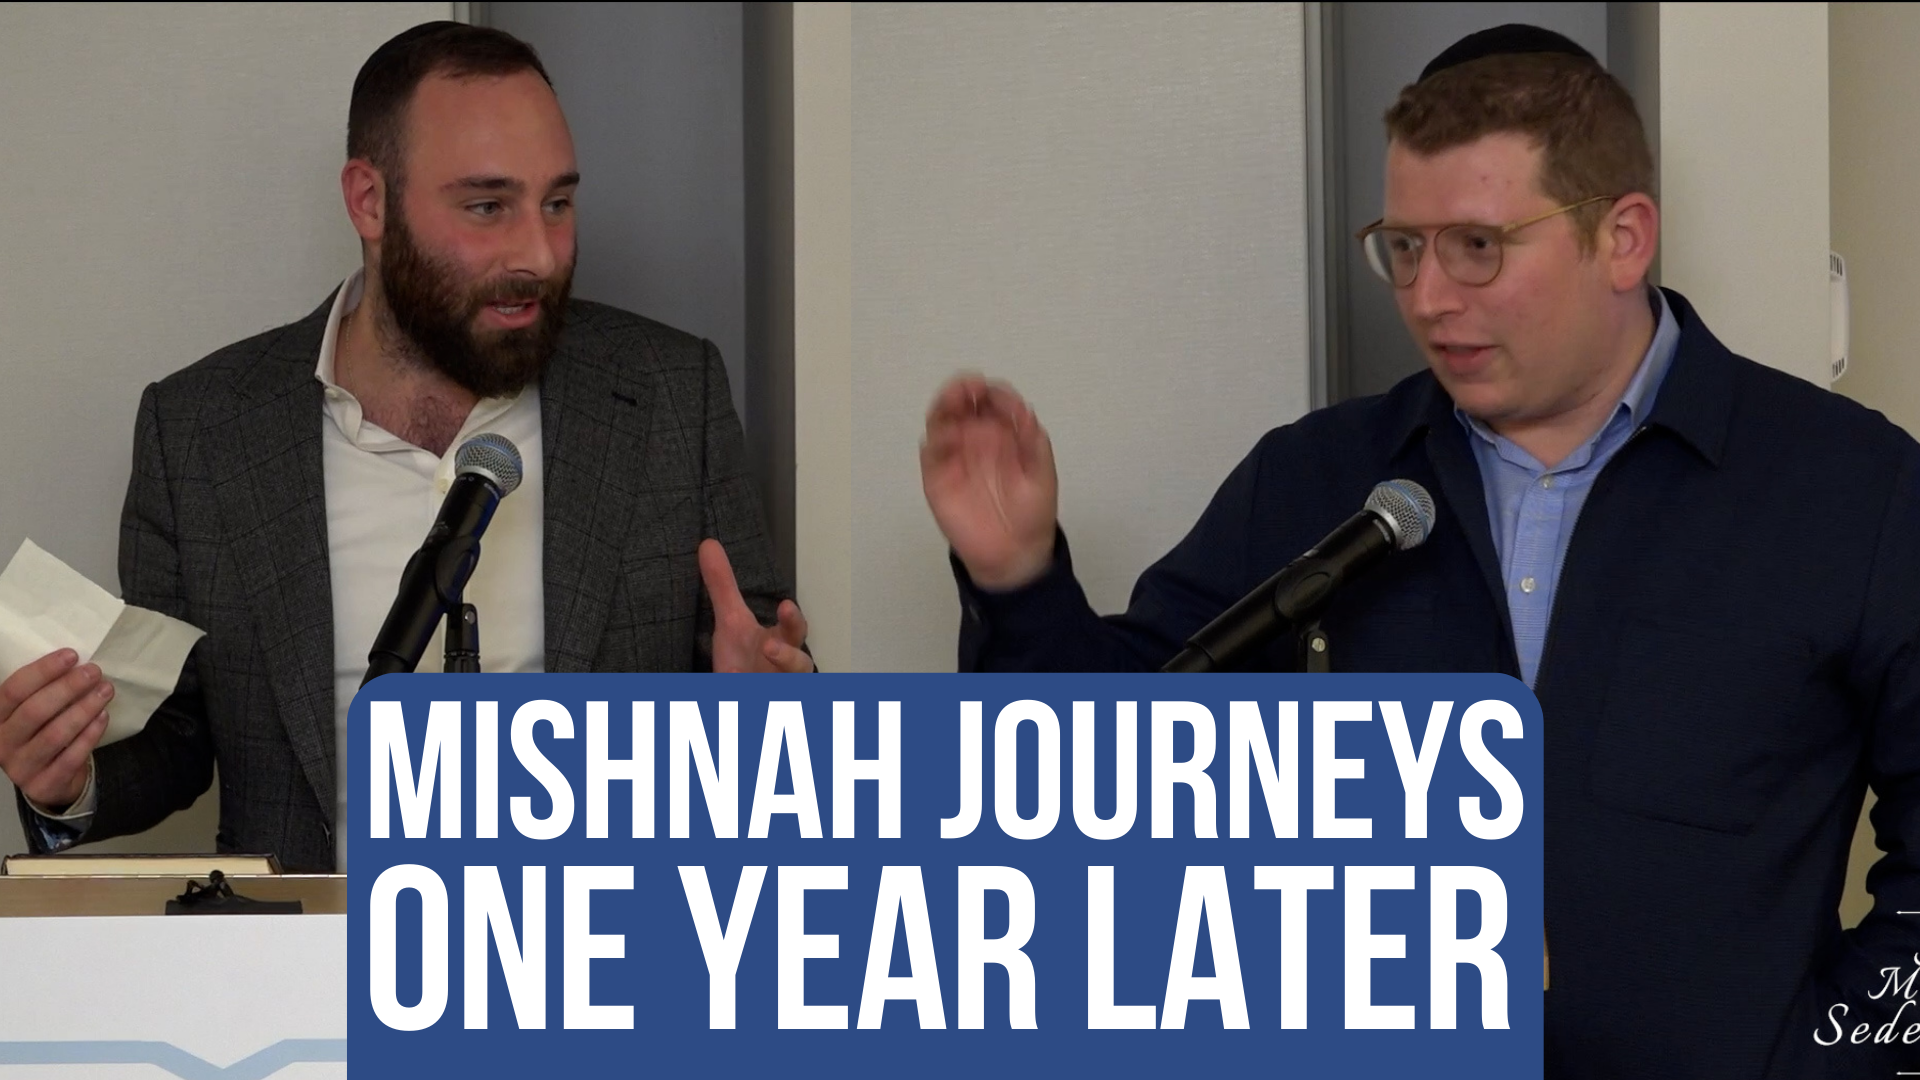 WATCH: Mishnah Journeys One Year Later